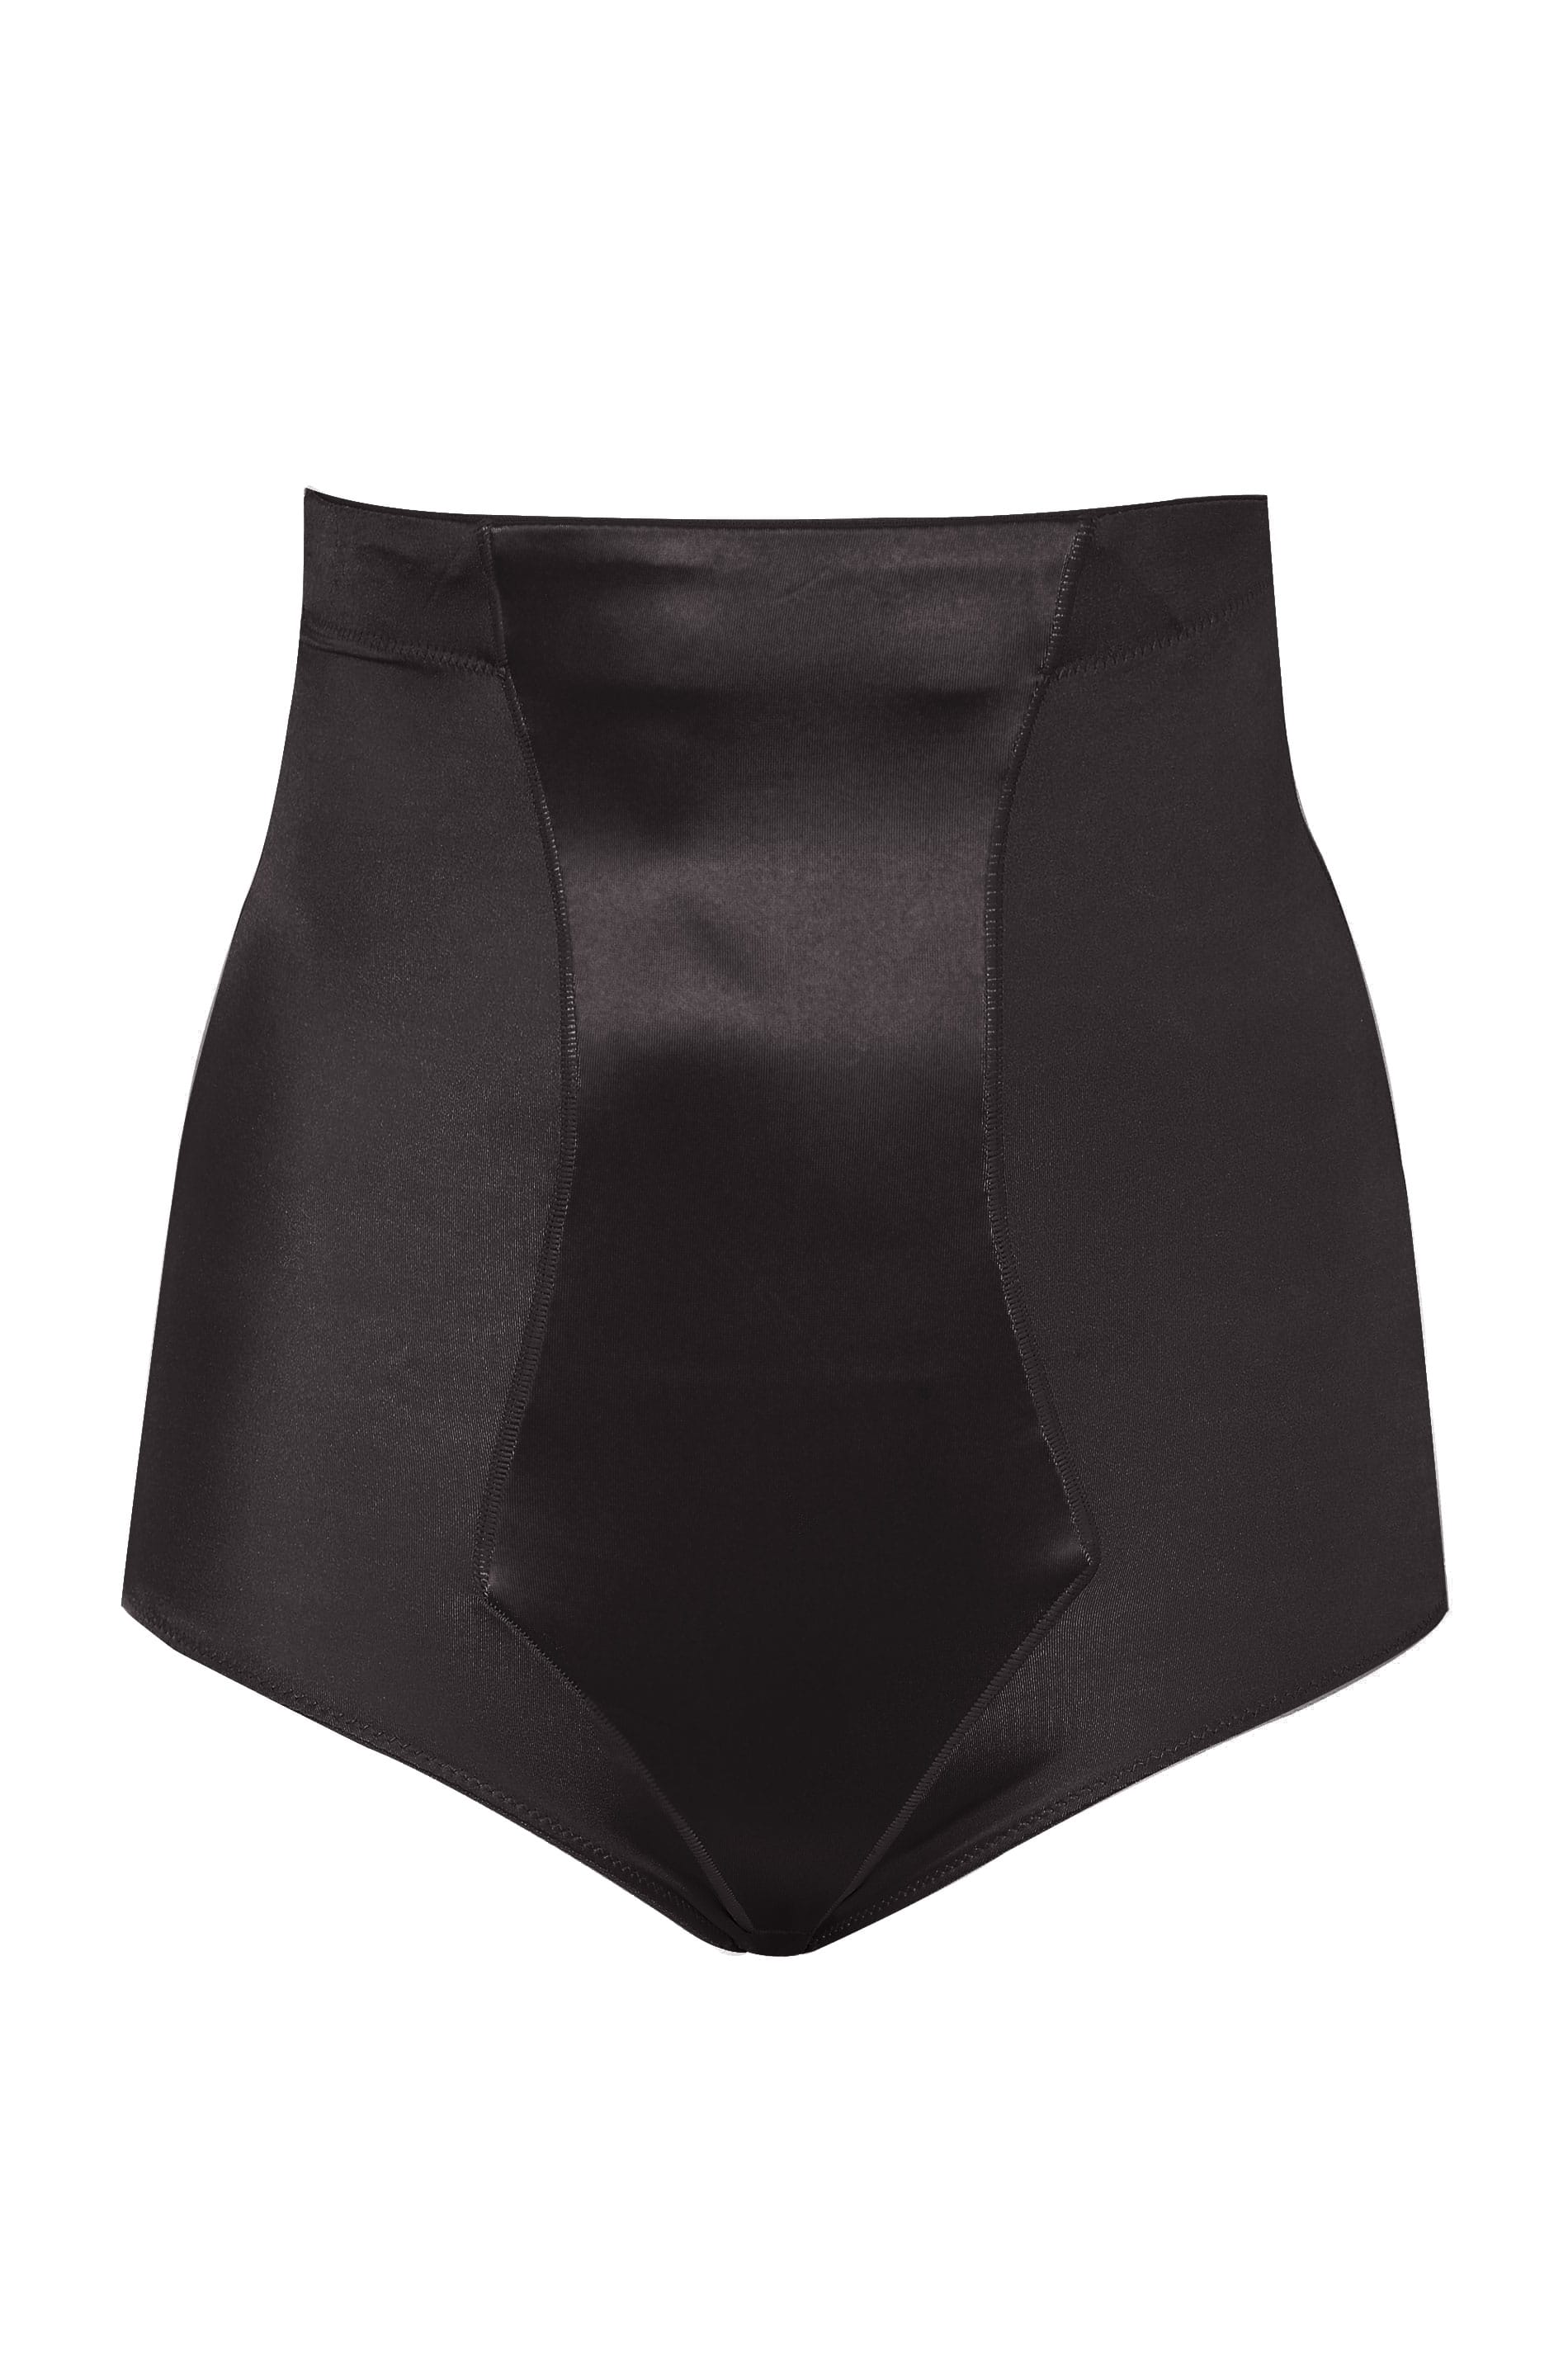 Truly Essential Black High-Waisted Brief Panty